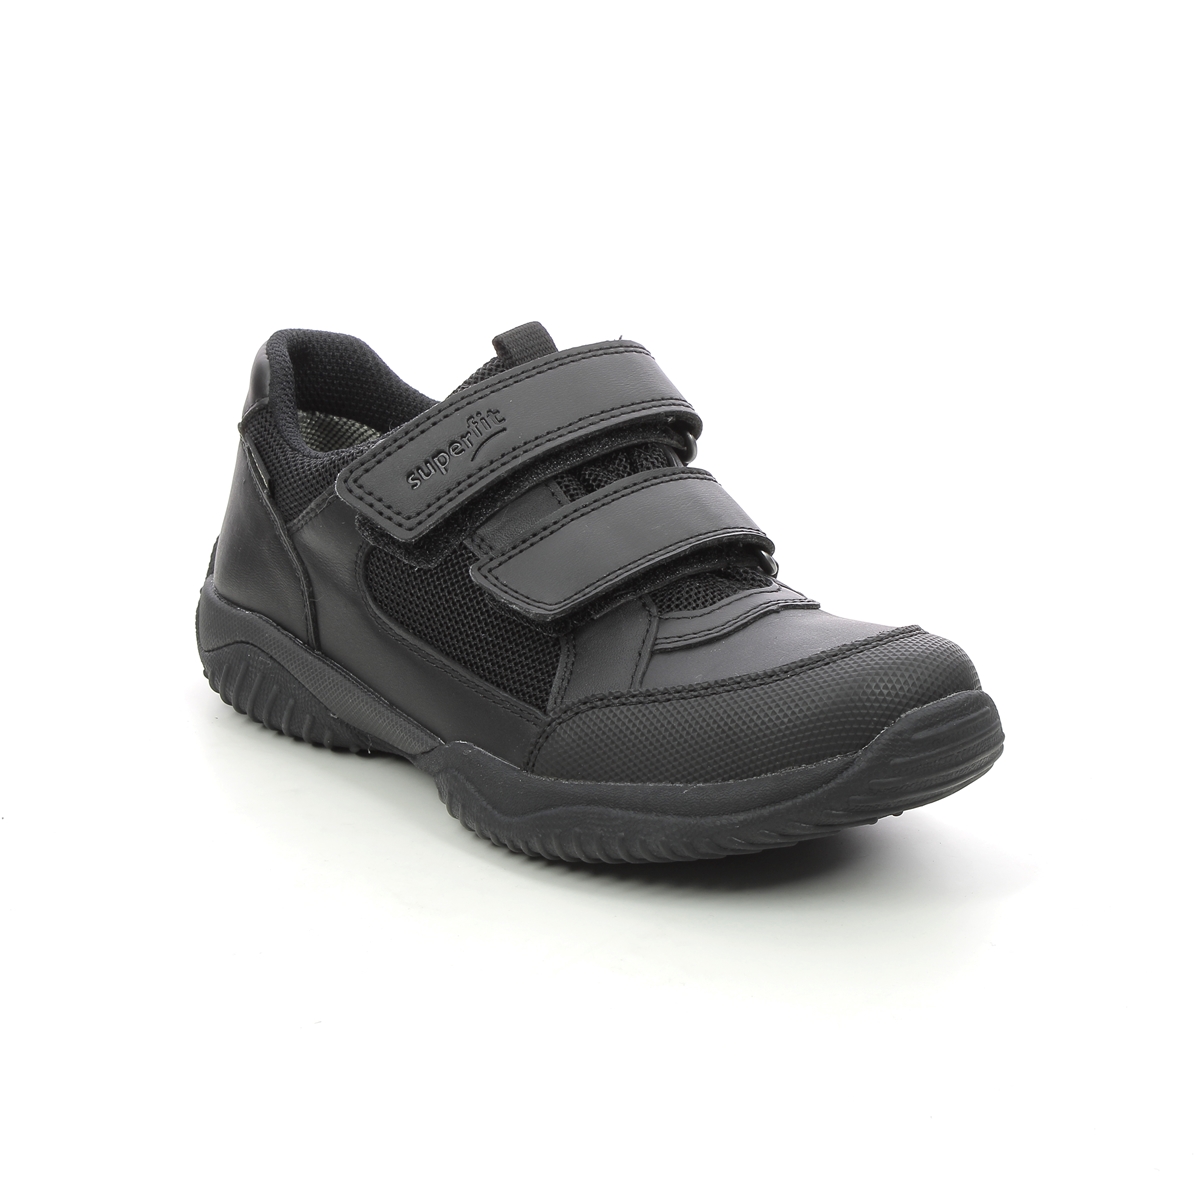 Superfit Storm Shoe Gtx Black Leather Kids Boys Casual Shoes 1009382-0000 In Size 38 In Plain Black Leather For kids